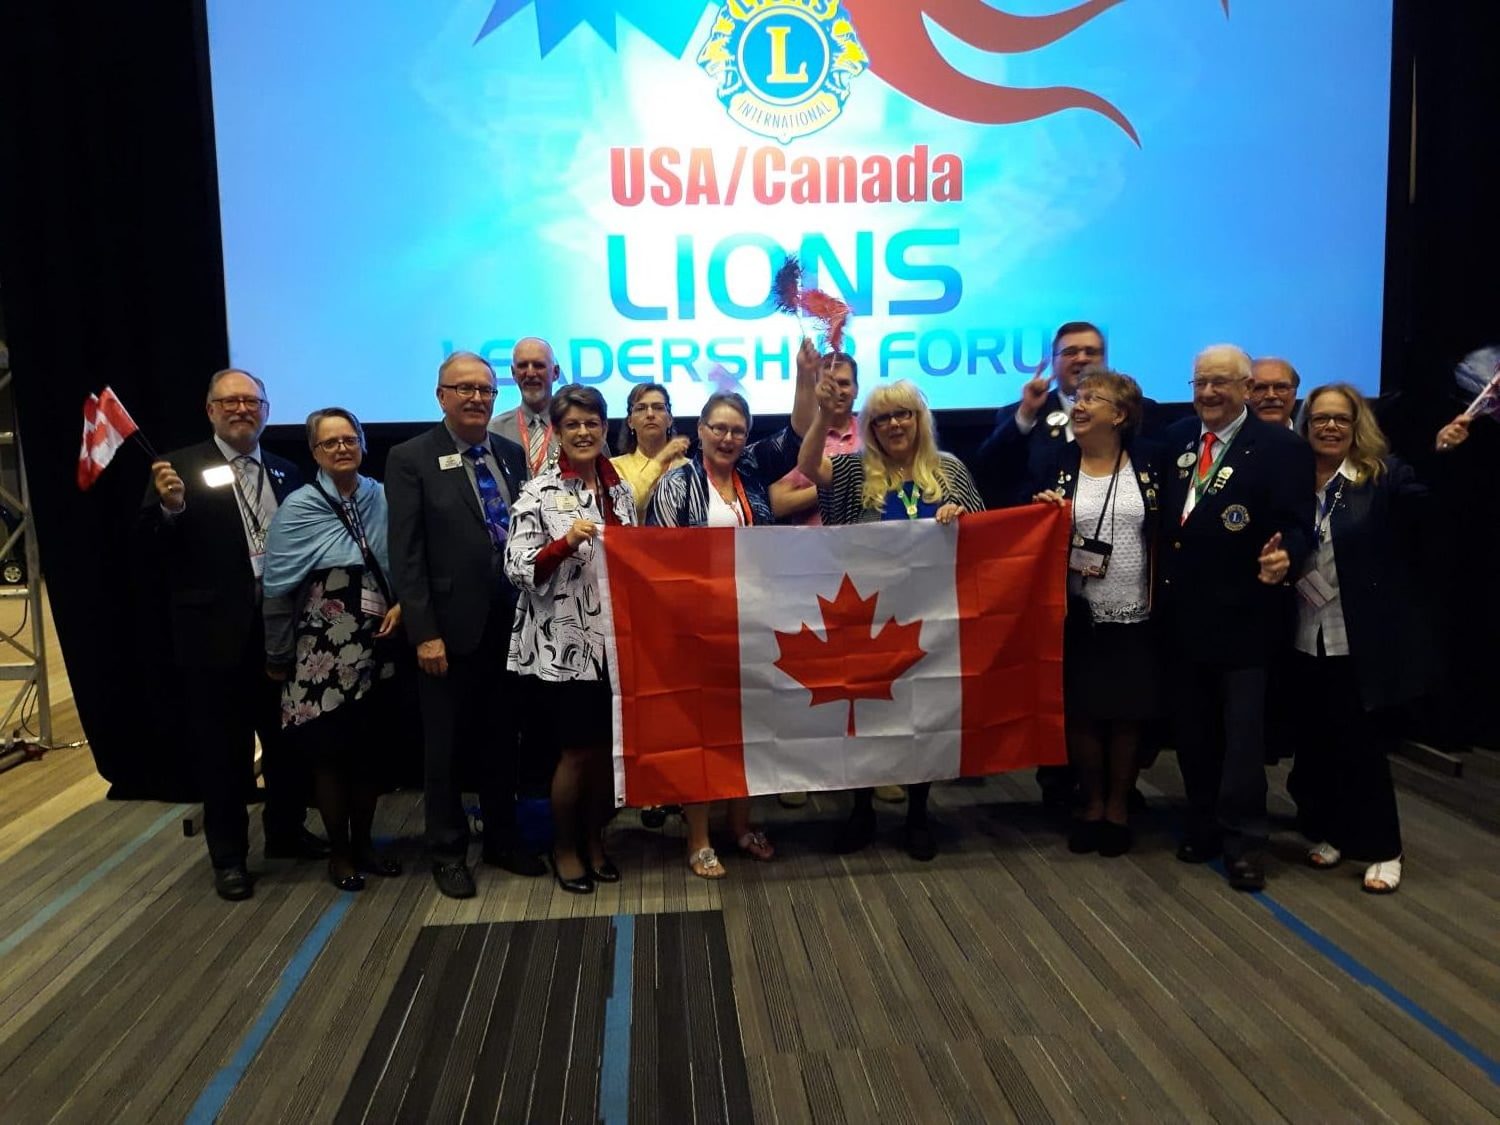 Lions Club Convention Awarded to Calgary for 2022 Leadership Forum